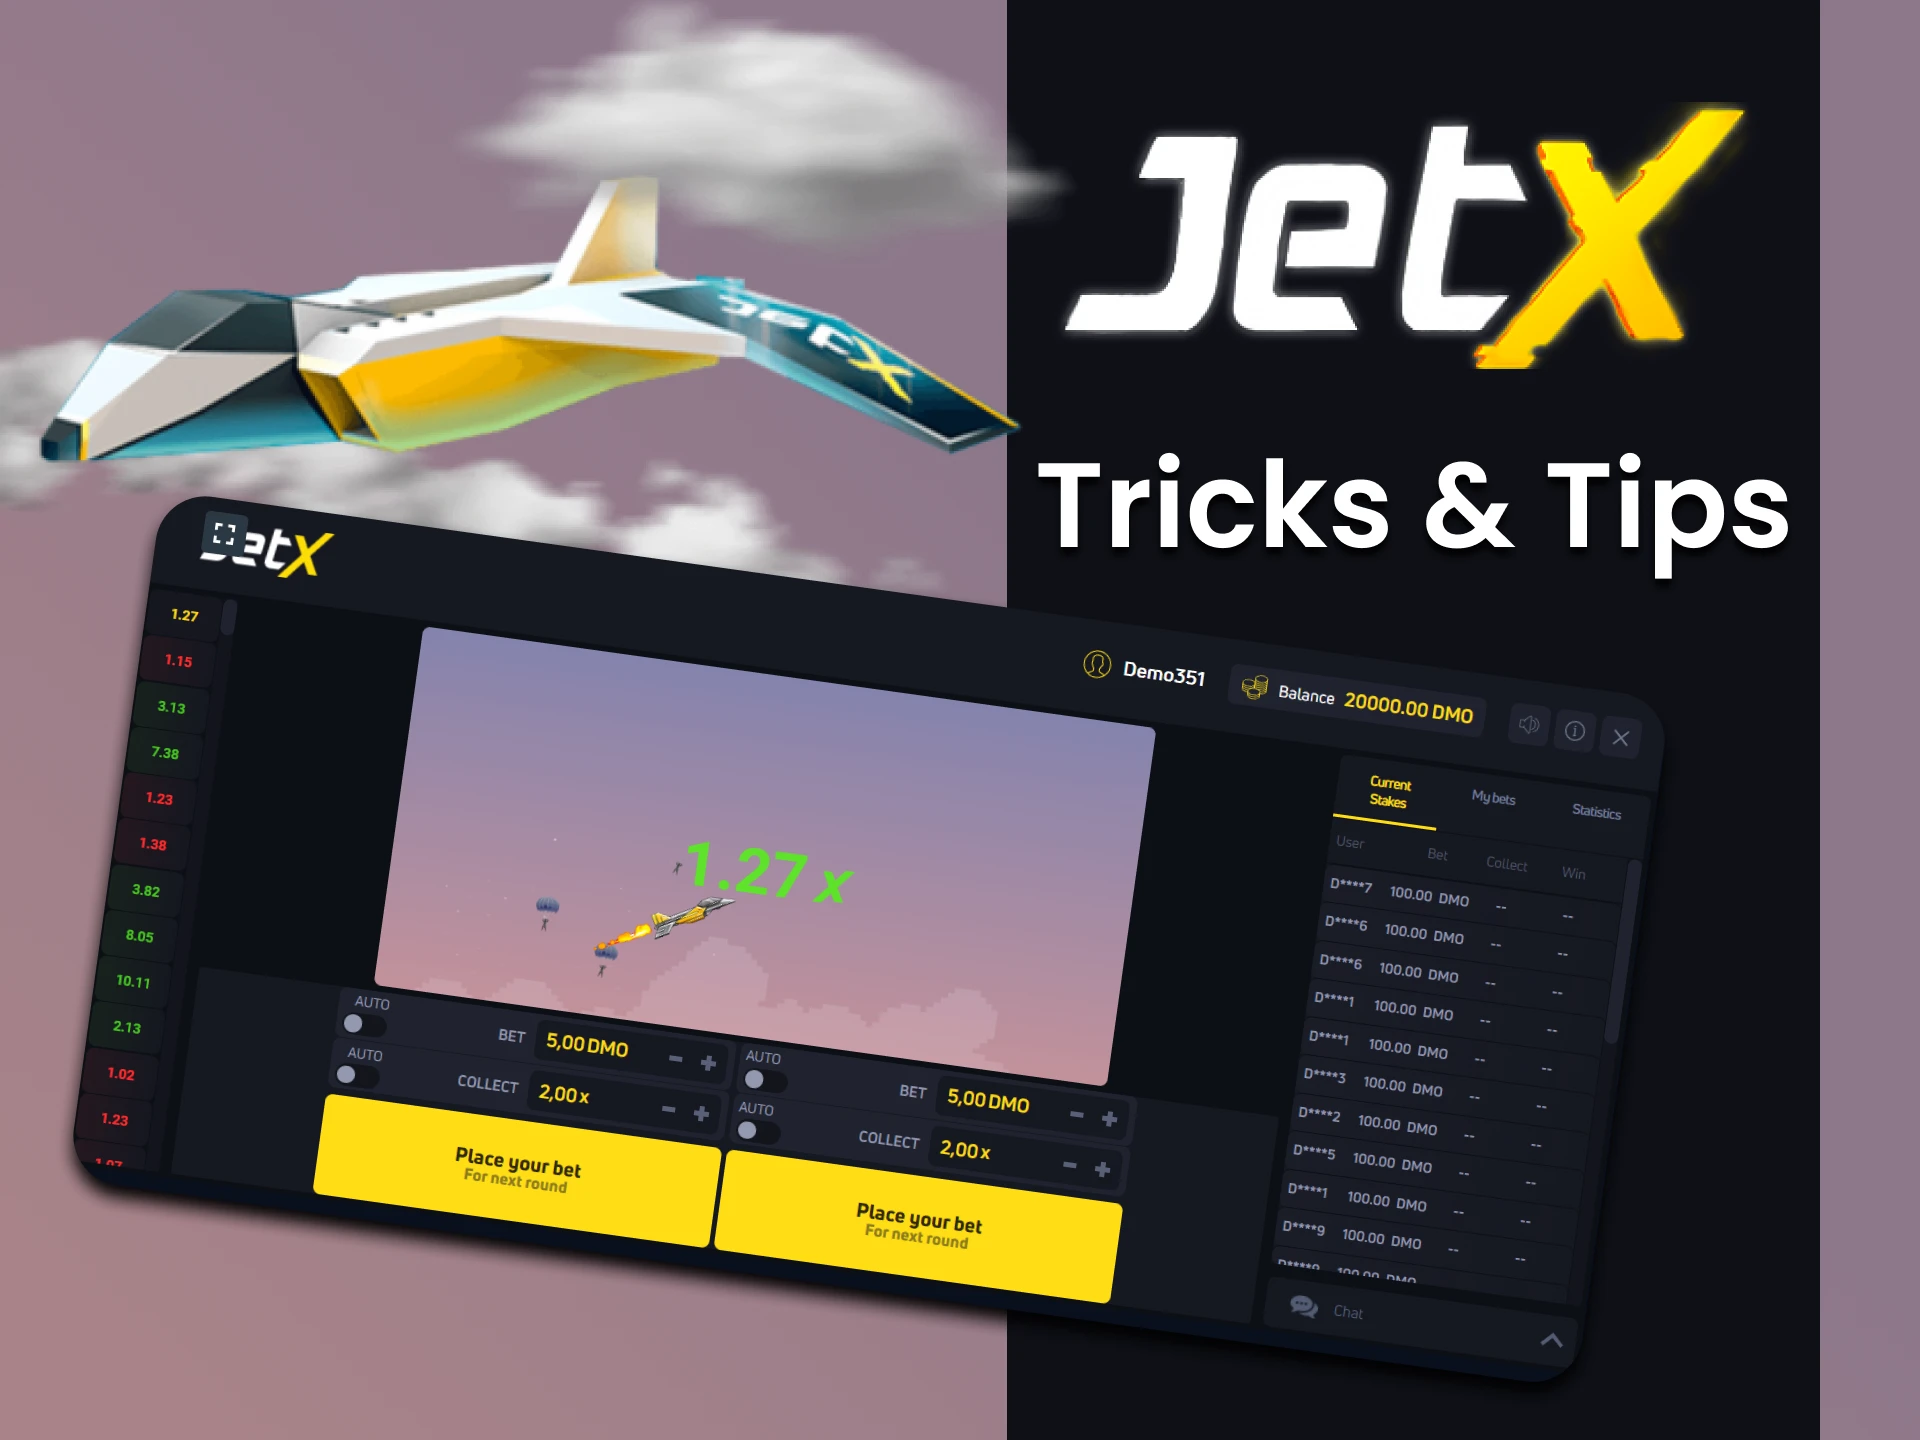 There are many tricks and tips to win at JetX.